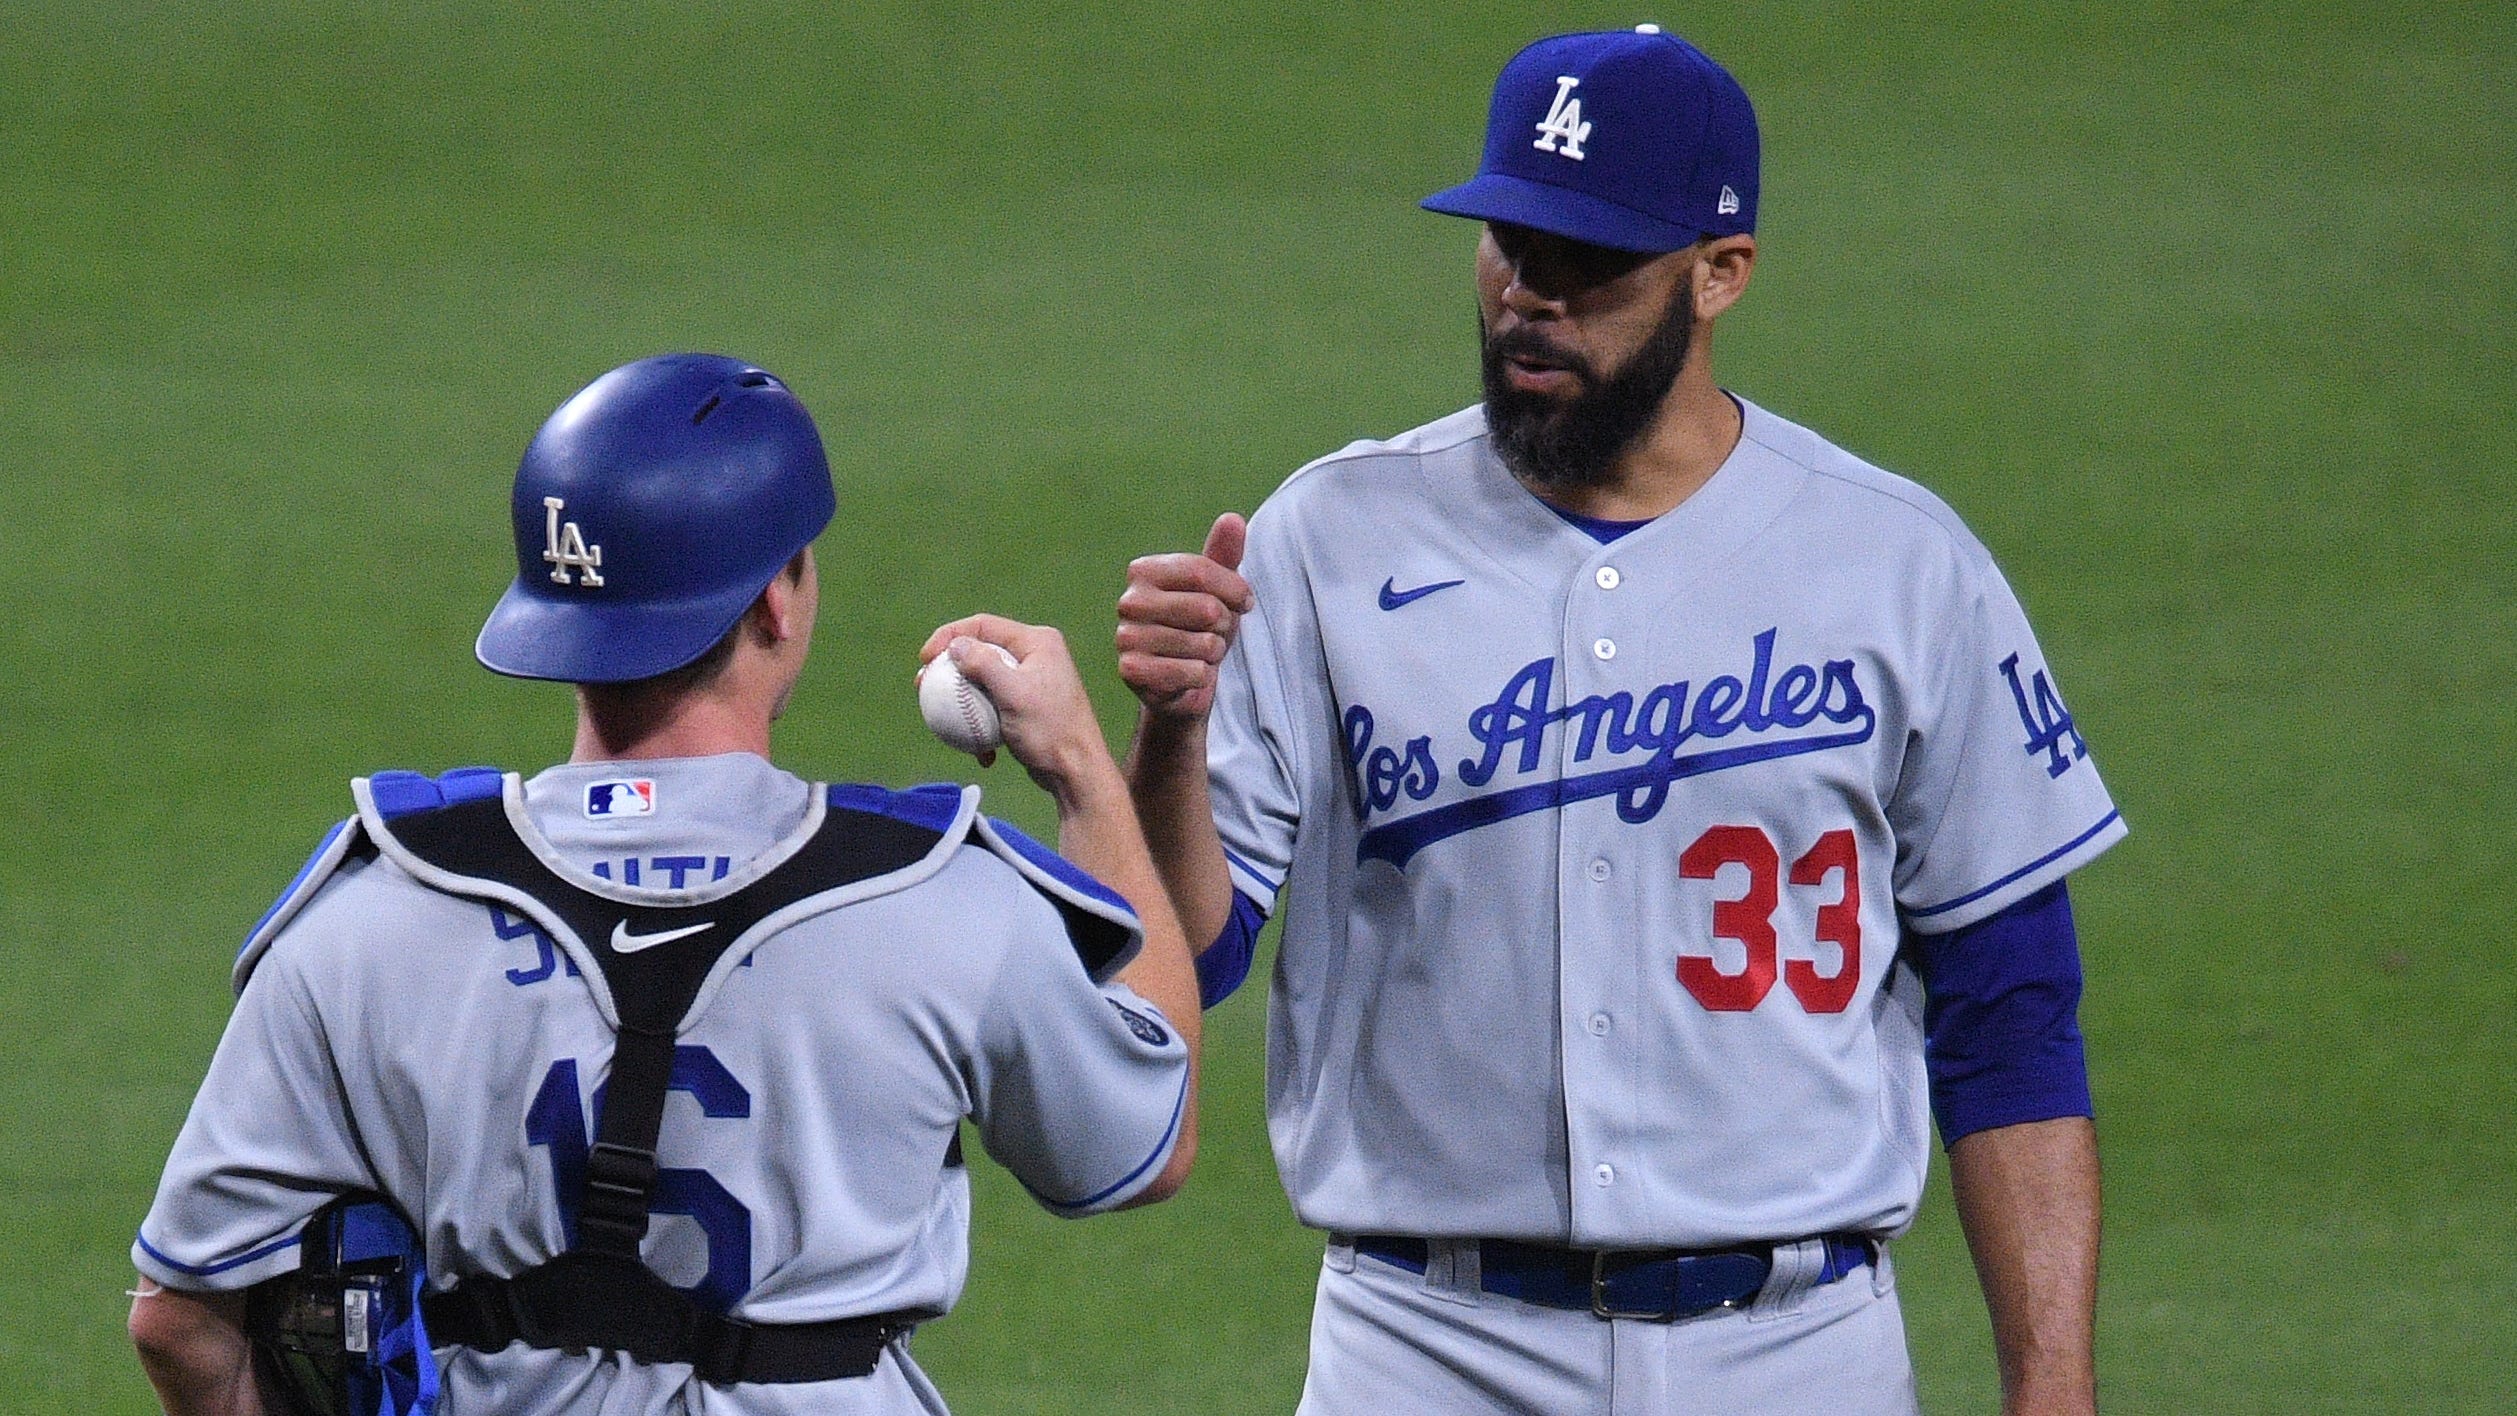 Los Angeles a unanimous No. 1 in USA MLB Rankings